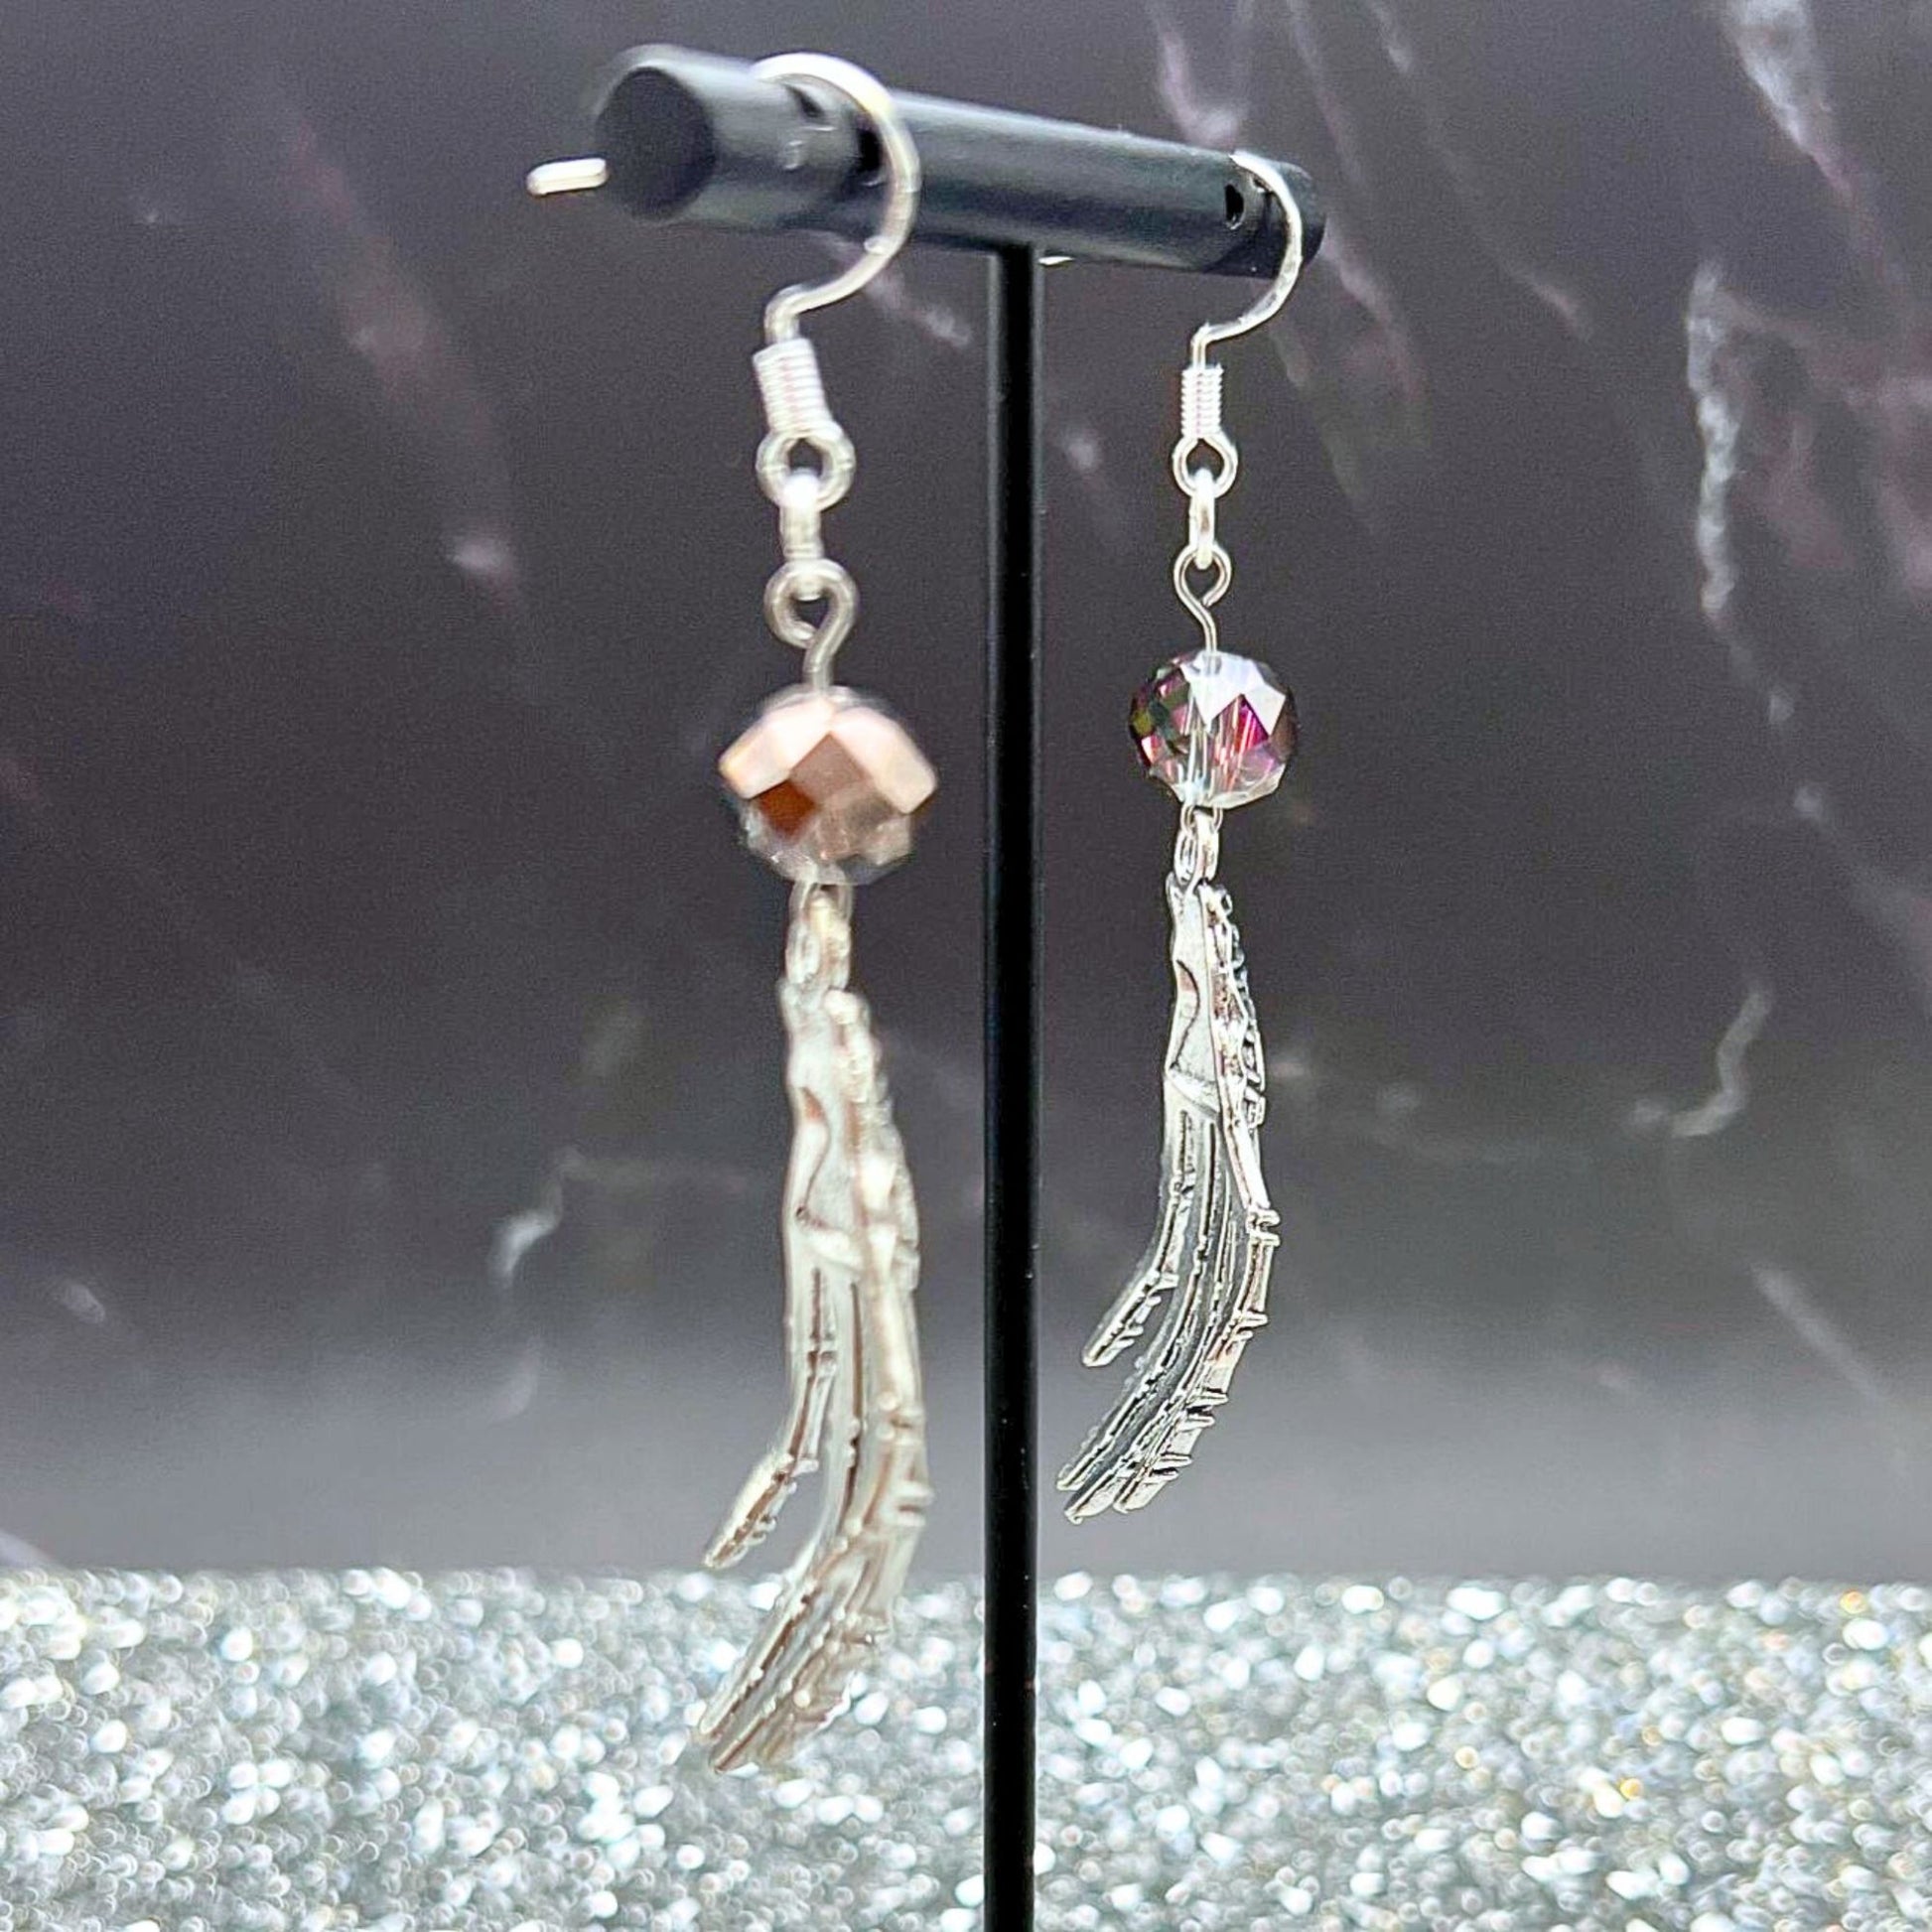 Skeleton Hand Beaded Earrings. Displayed on a clear stand.